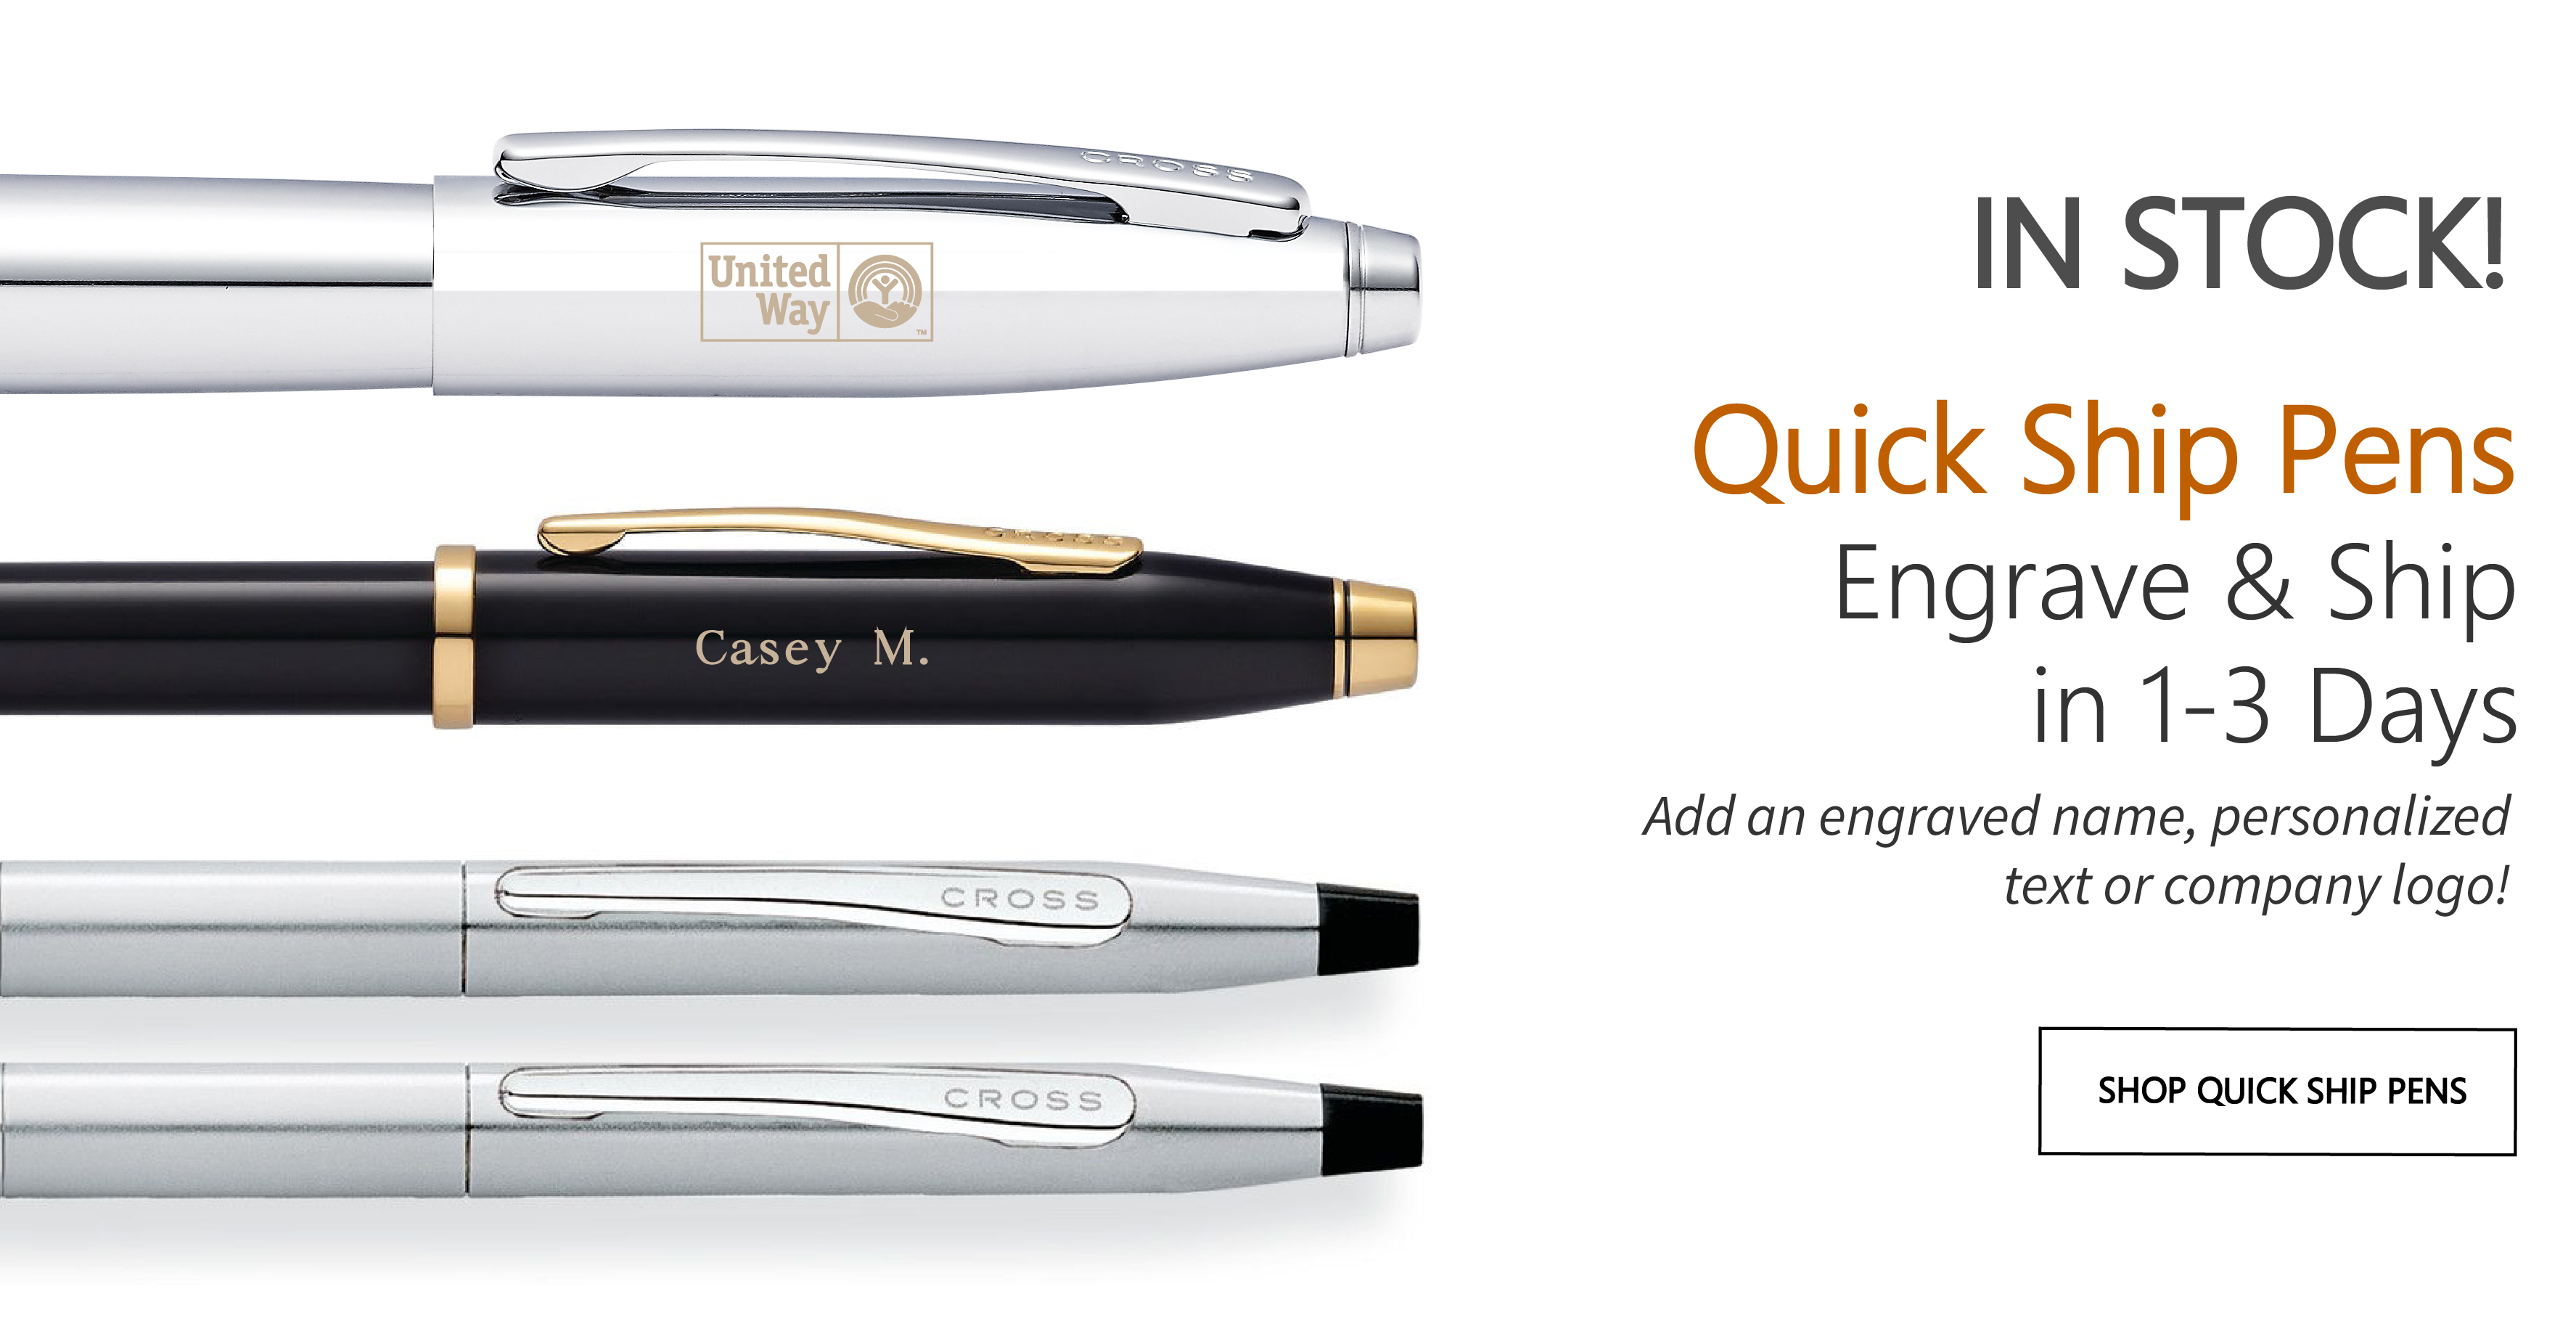 Cross Pens Branded with a Logo | Engraved or Printed